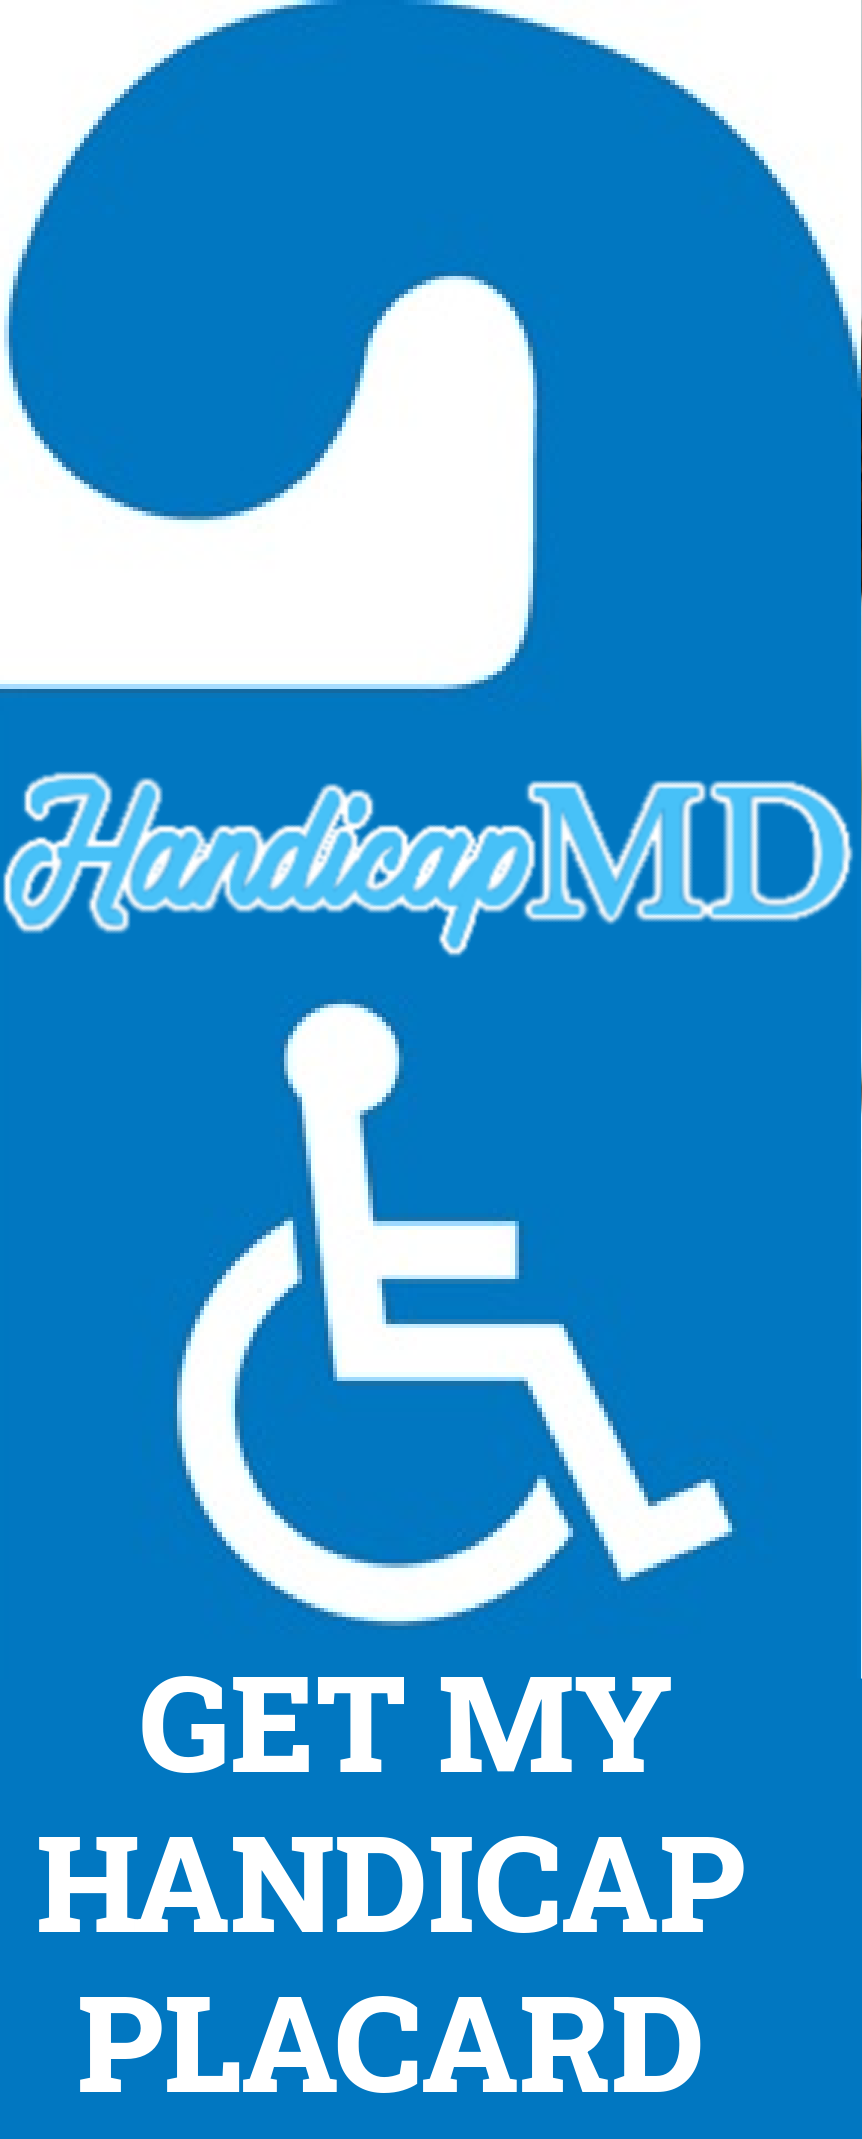 Get a Disabled Parking Permit in Kansas City MO Online